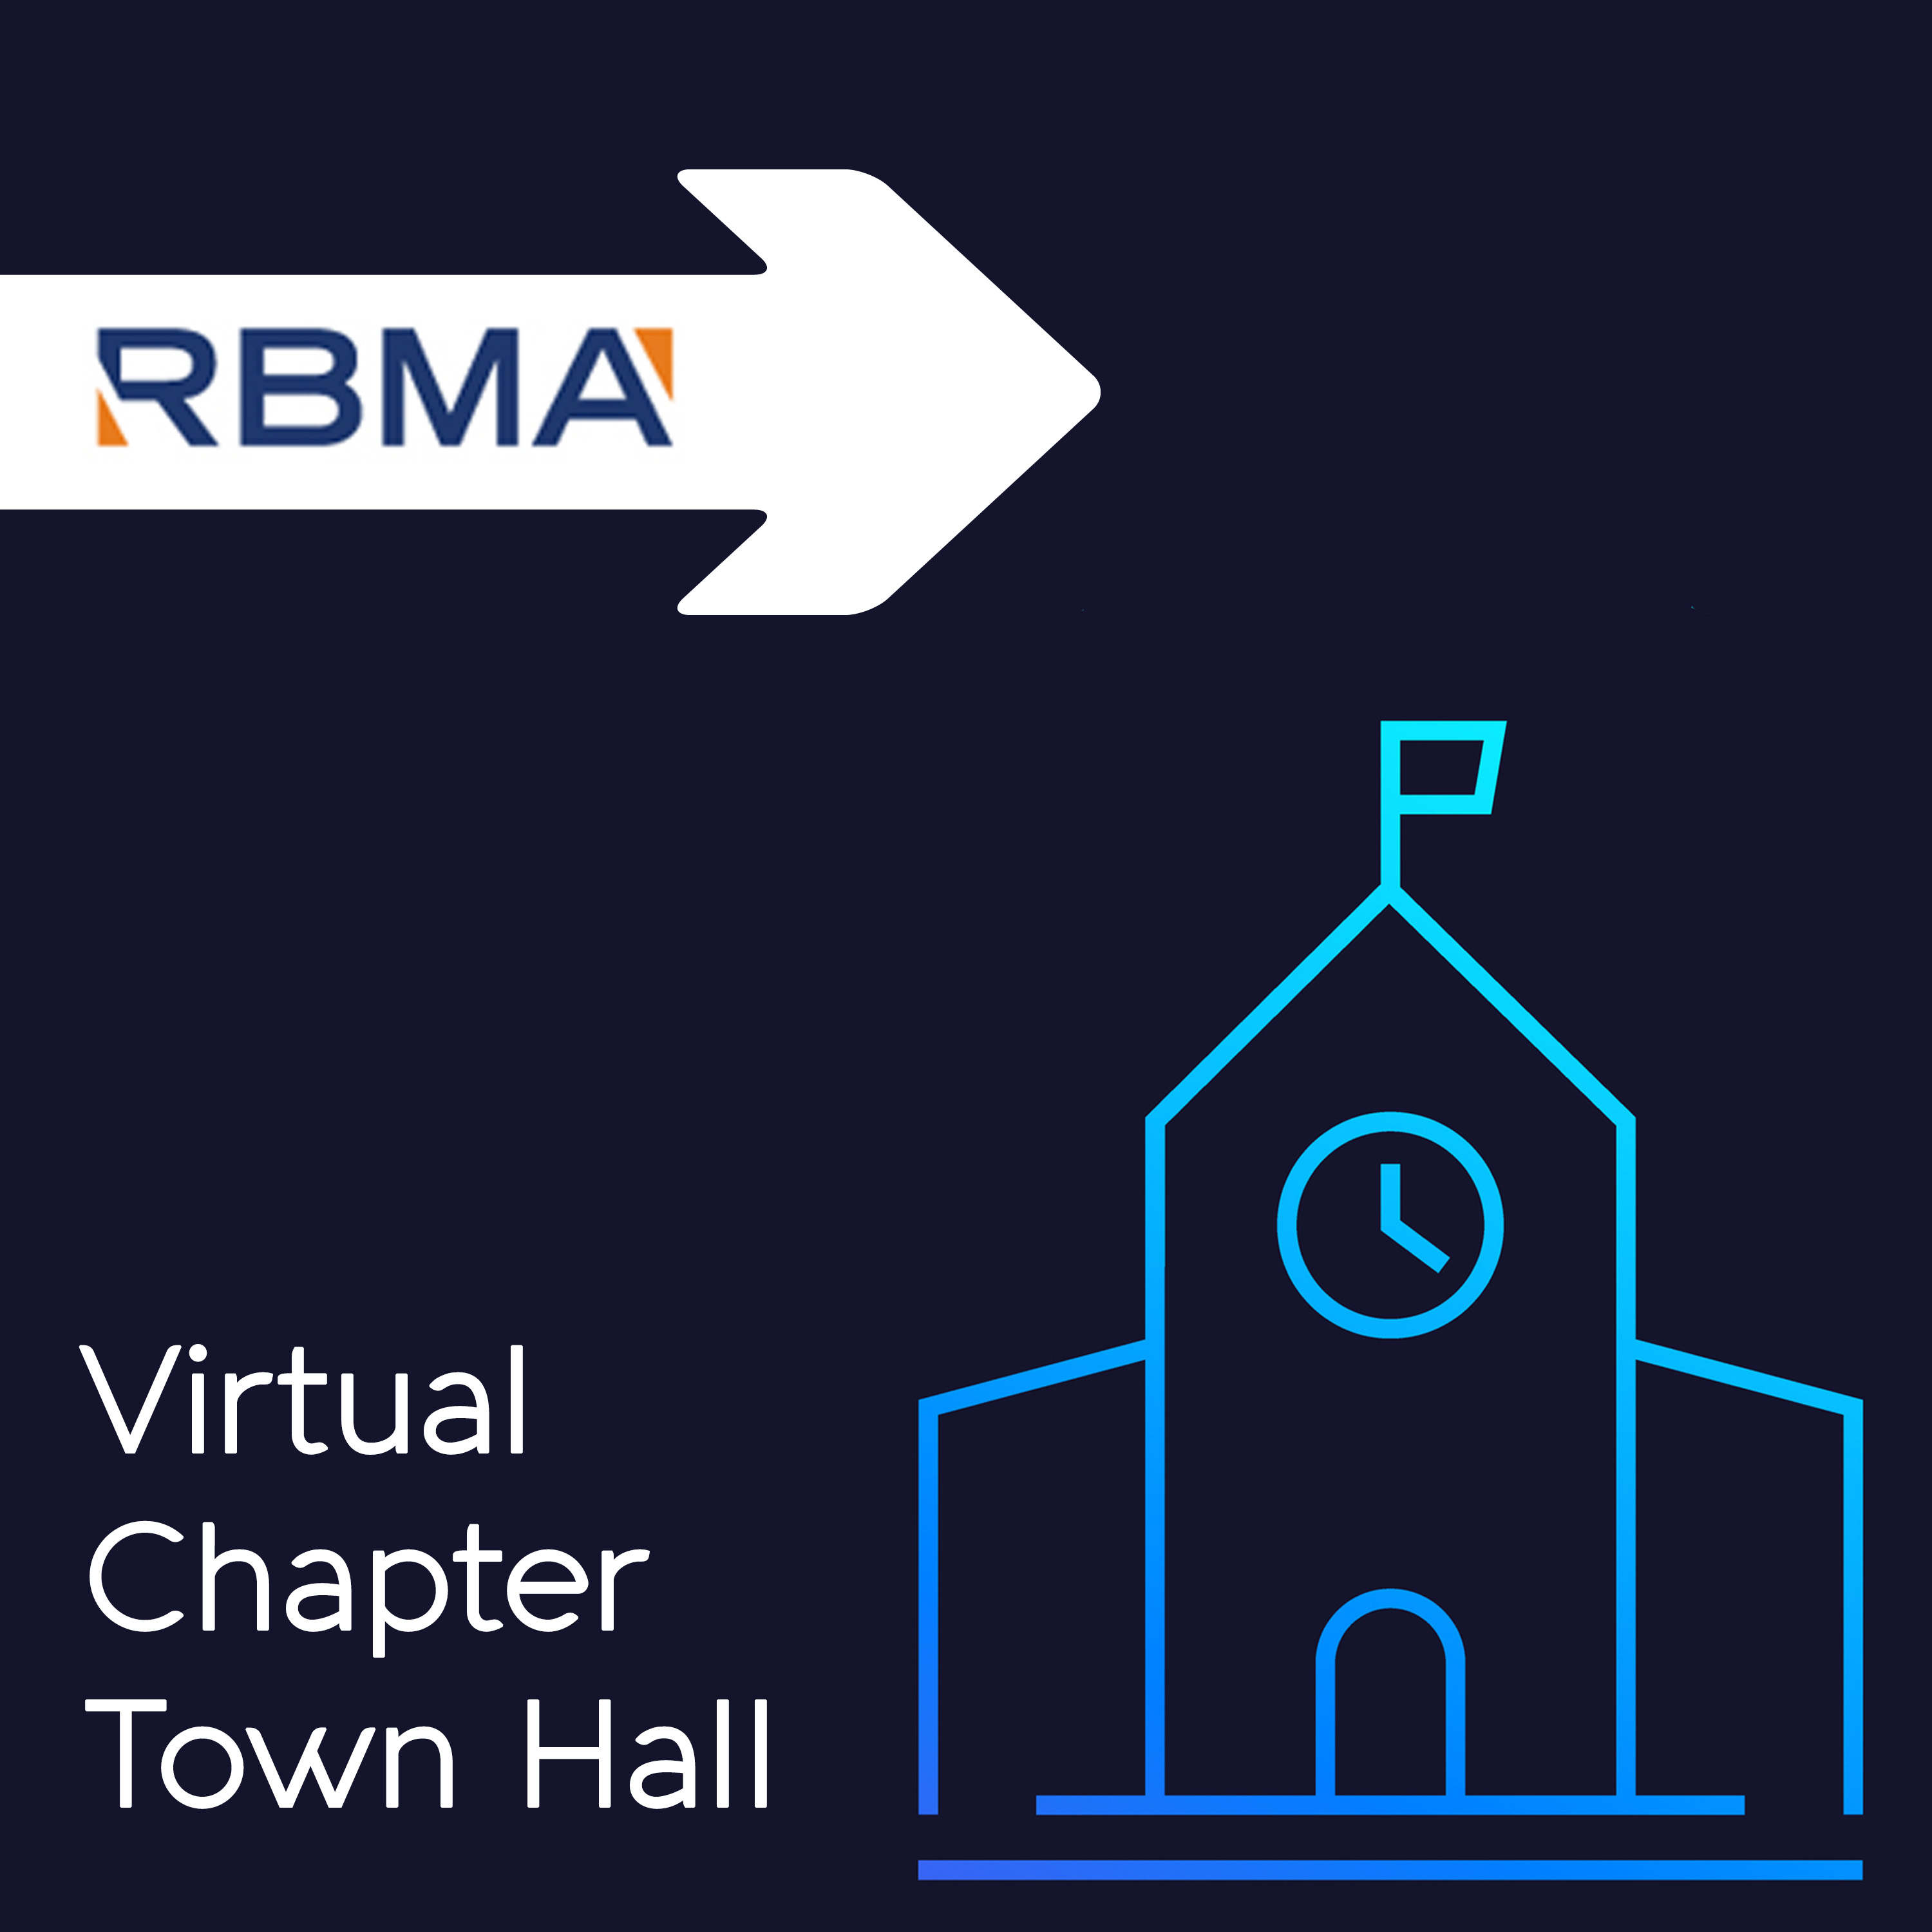 Delta States Virtual Chapter Town Hall